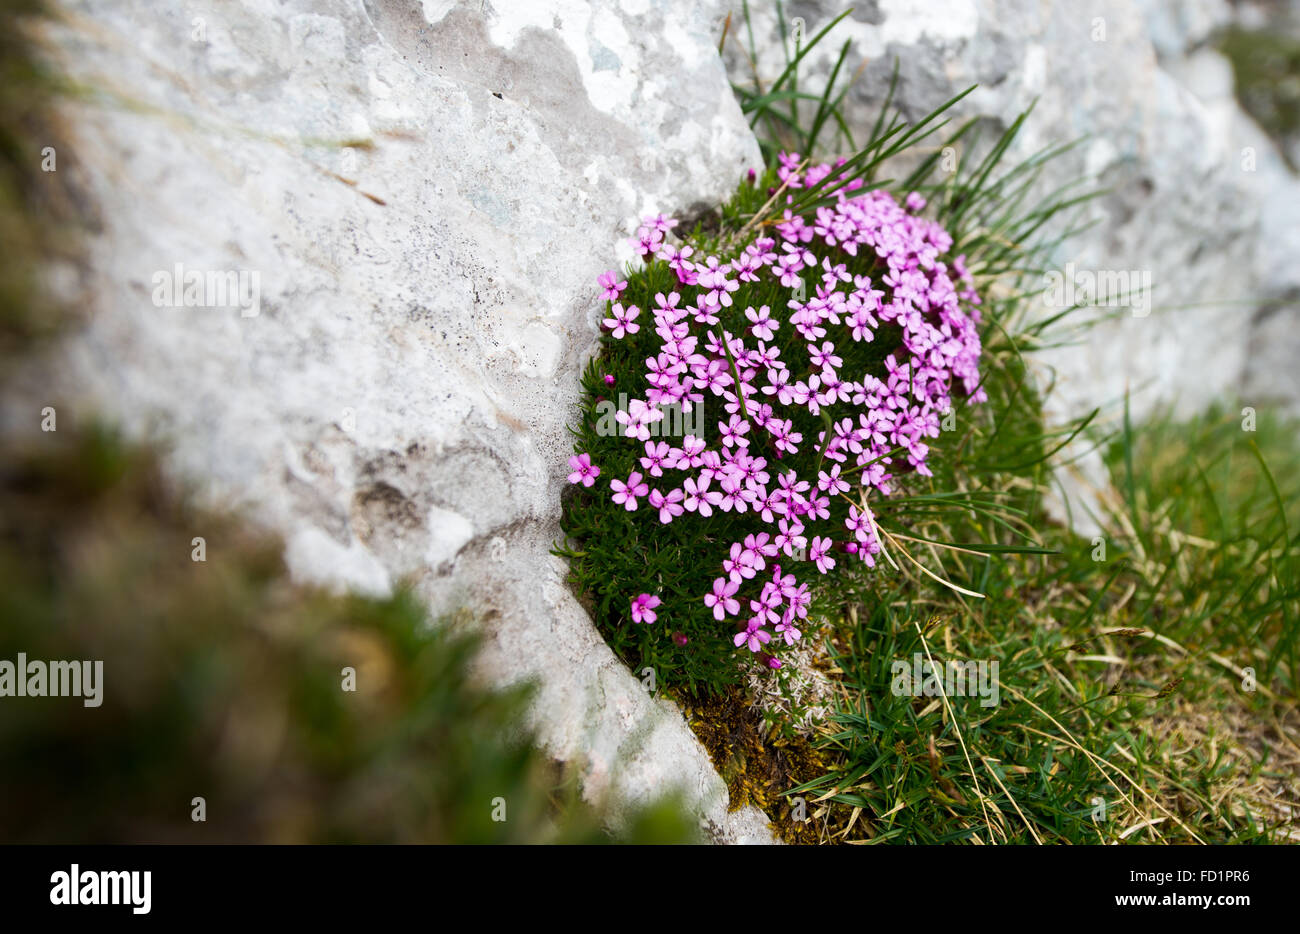 Mountain flowers tucked into the rock. Stock Photo